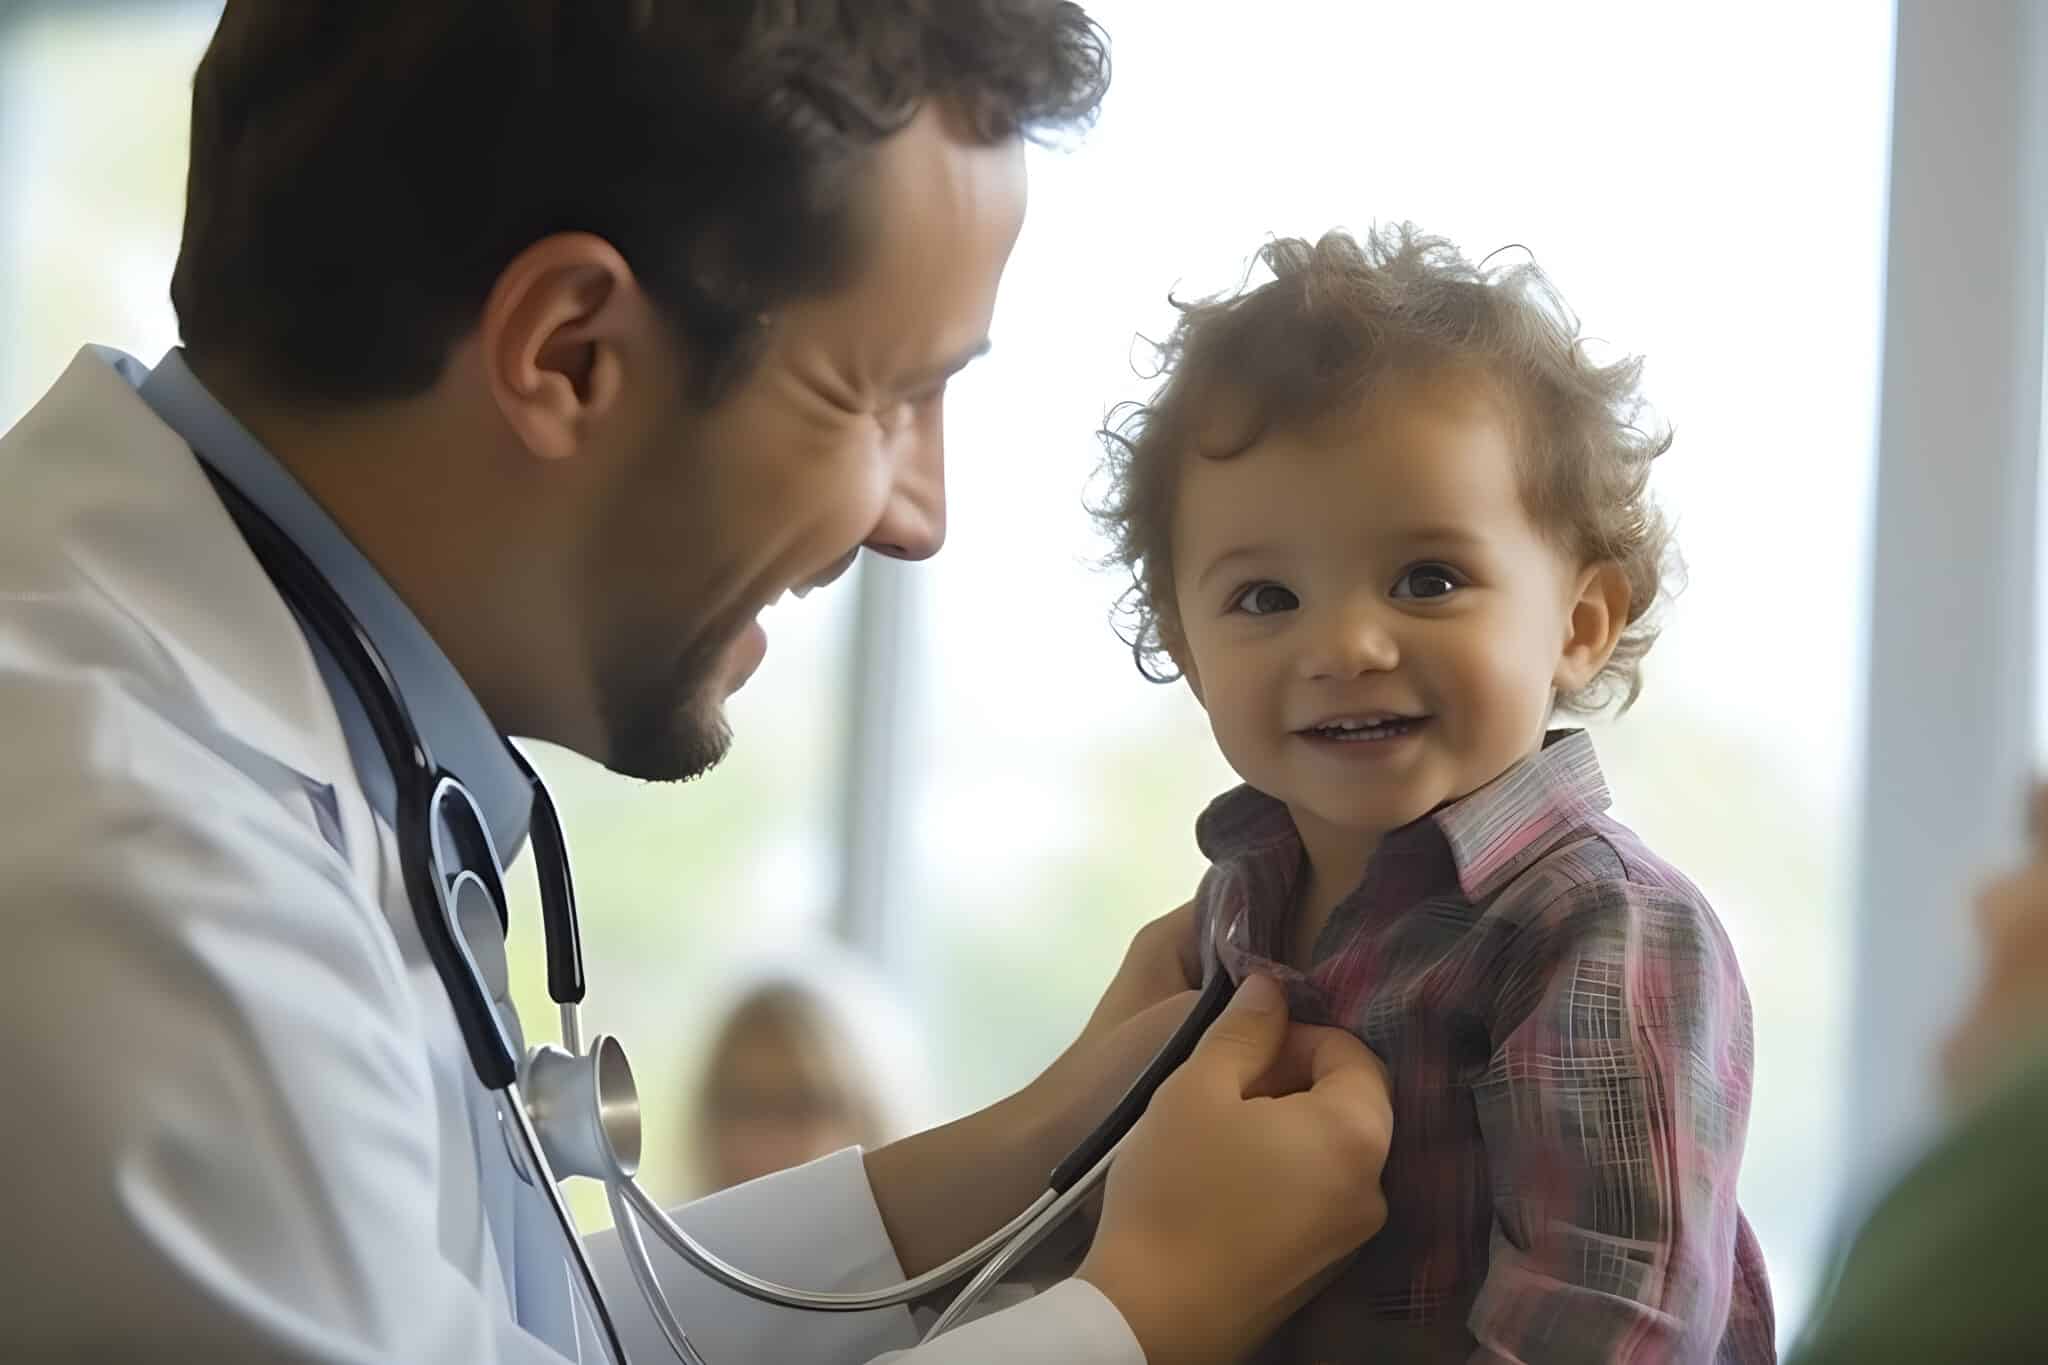 Happy doctor with baby, able to focus on patient care thanks to outsourcing medical transcription.